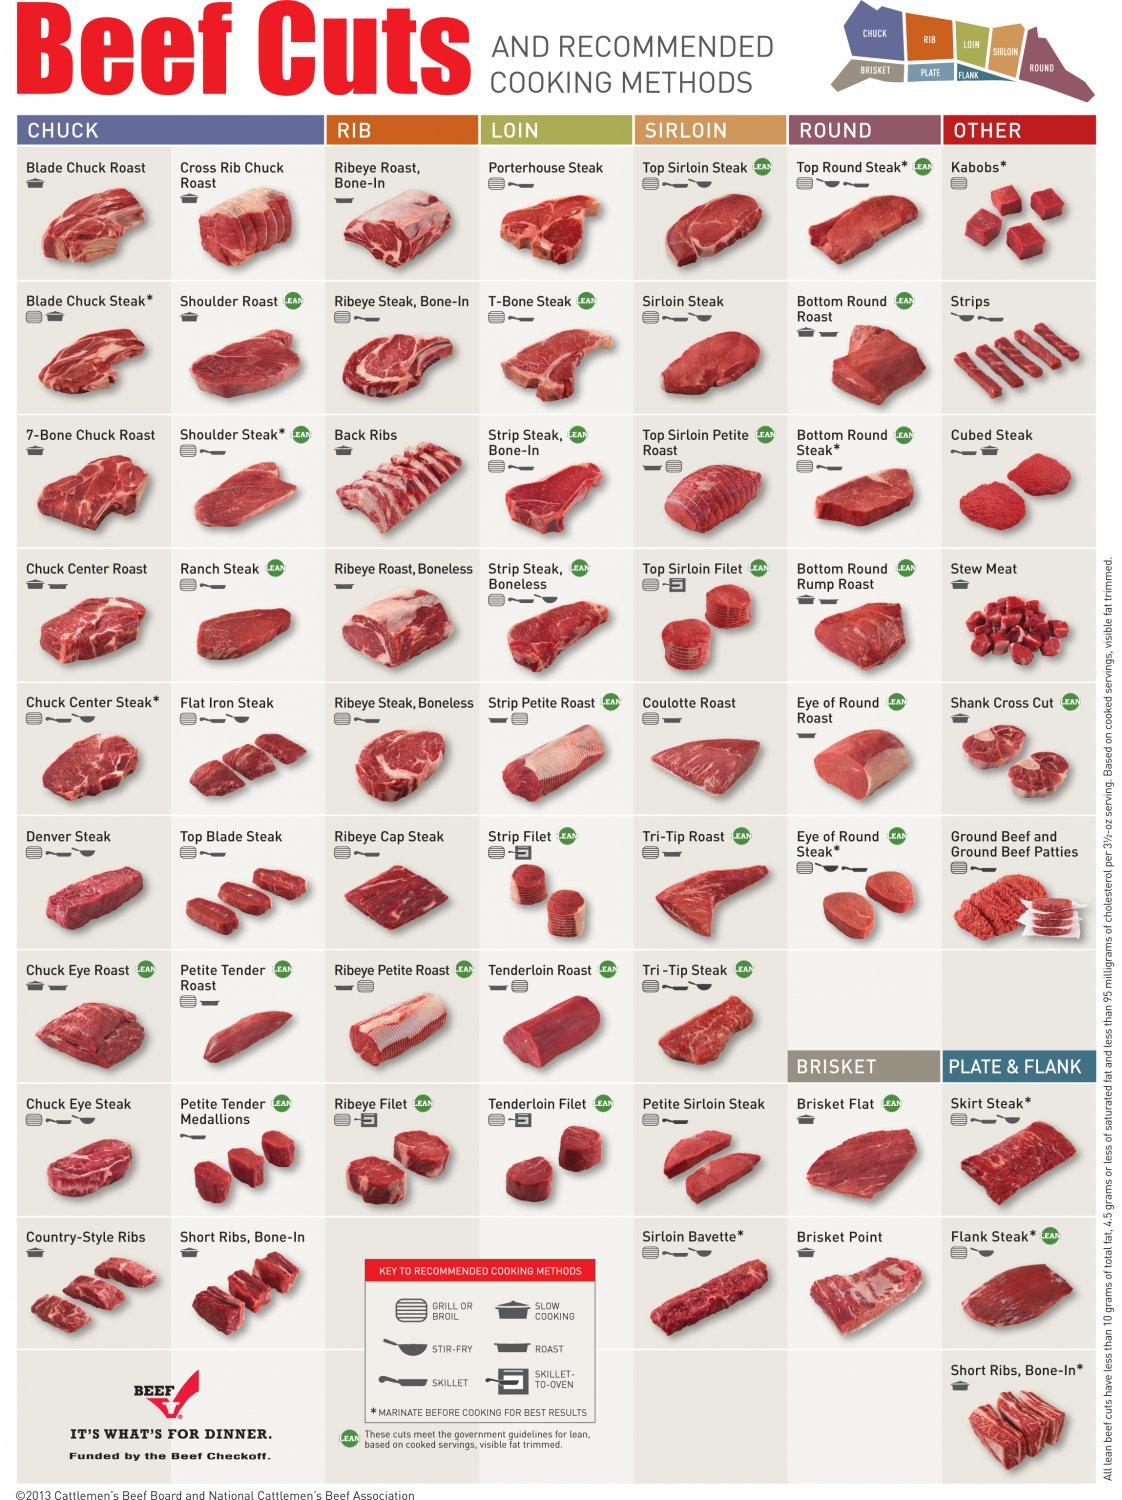 Beef Cuts Recommended Cooking Methods Chart 13"x19" (32cm/49cm) Polyester Fabric Poster